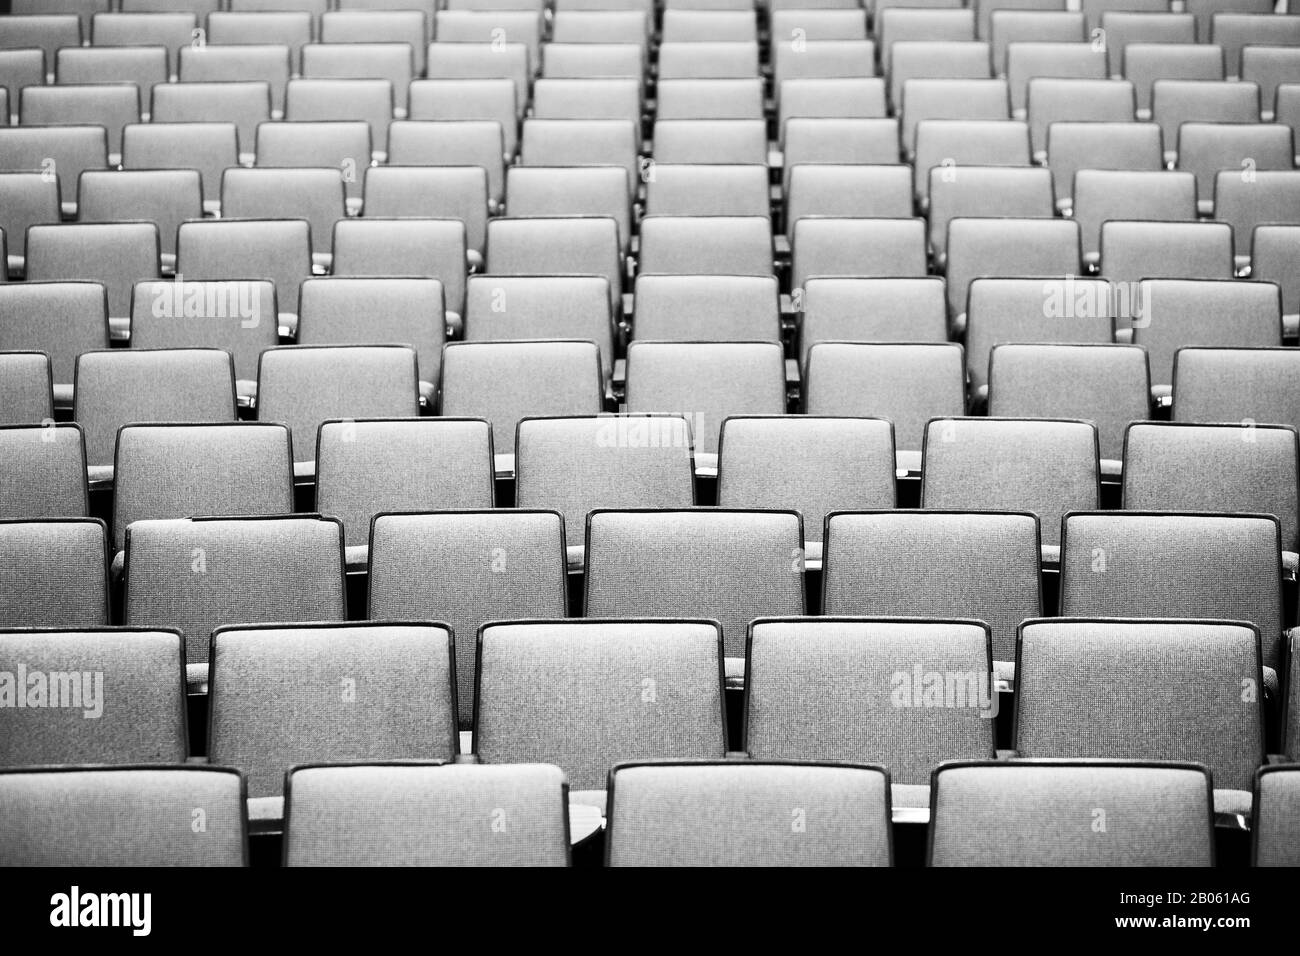 Stadium Seating in College Theatre Theater Rows for Show or Classroom Stock Photo